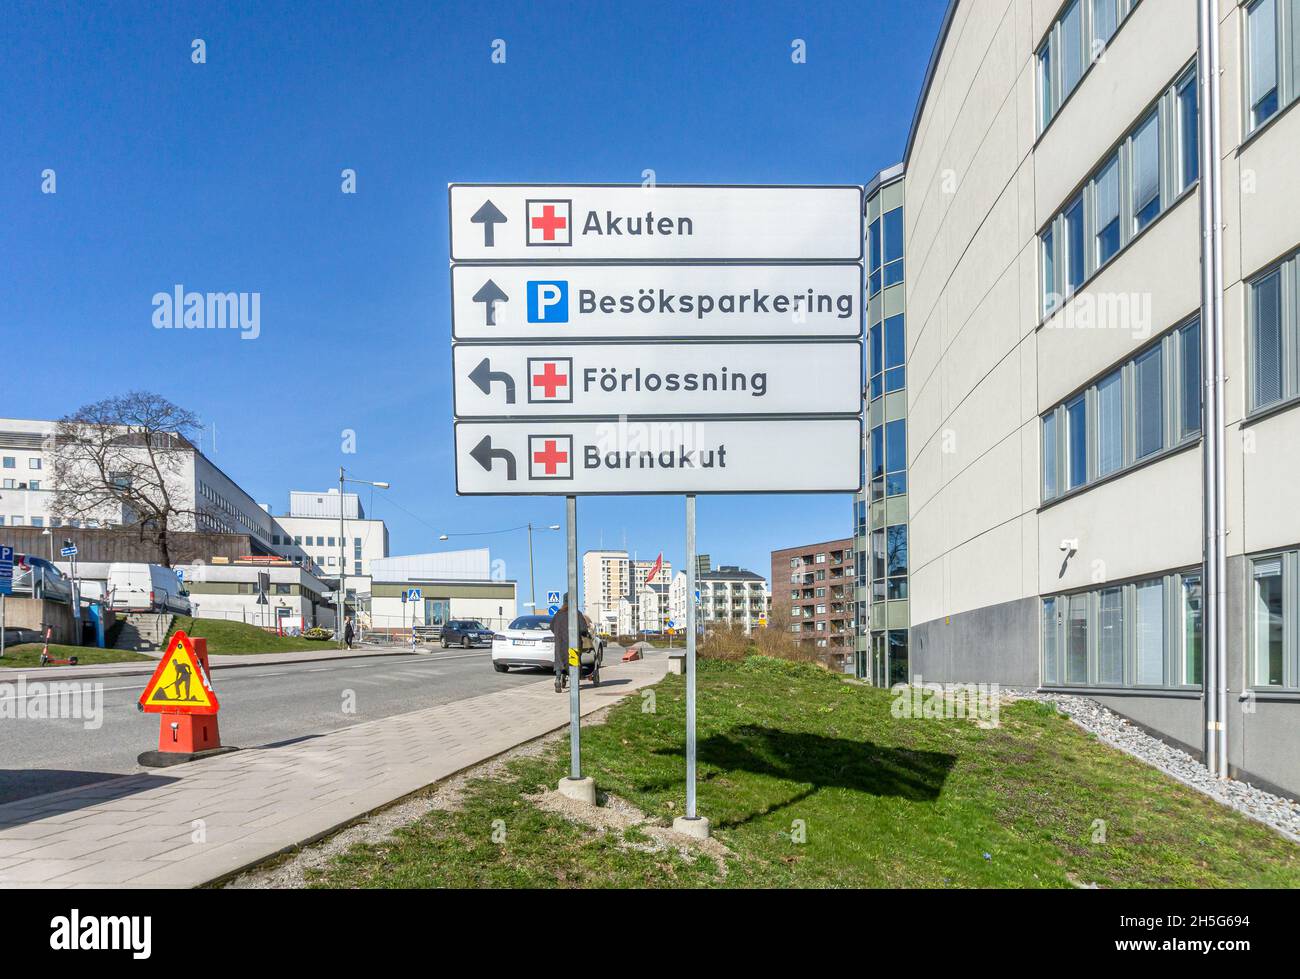 Stockholm, Sweden - April 15, 2021: Traffic signs with directions explained at the entrance to hospital area Stock Photo